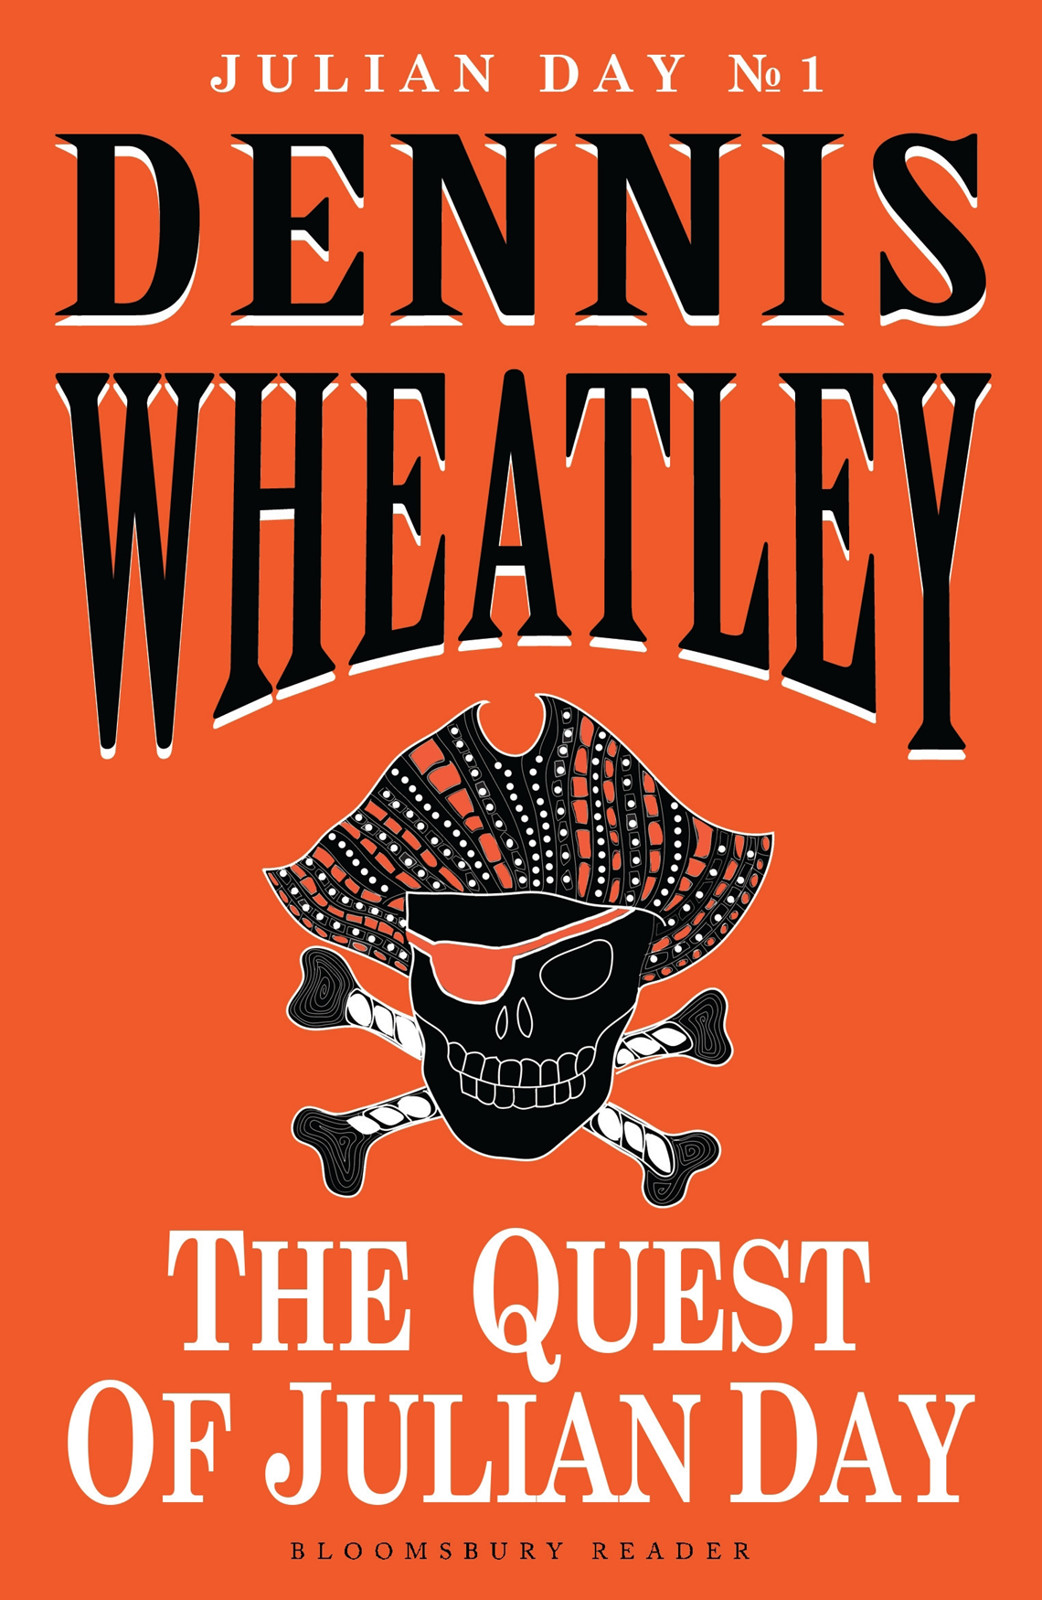 The Quest of Julian Day by Dennis Wheatley